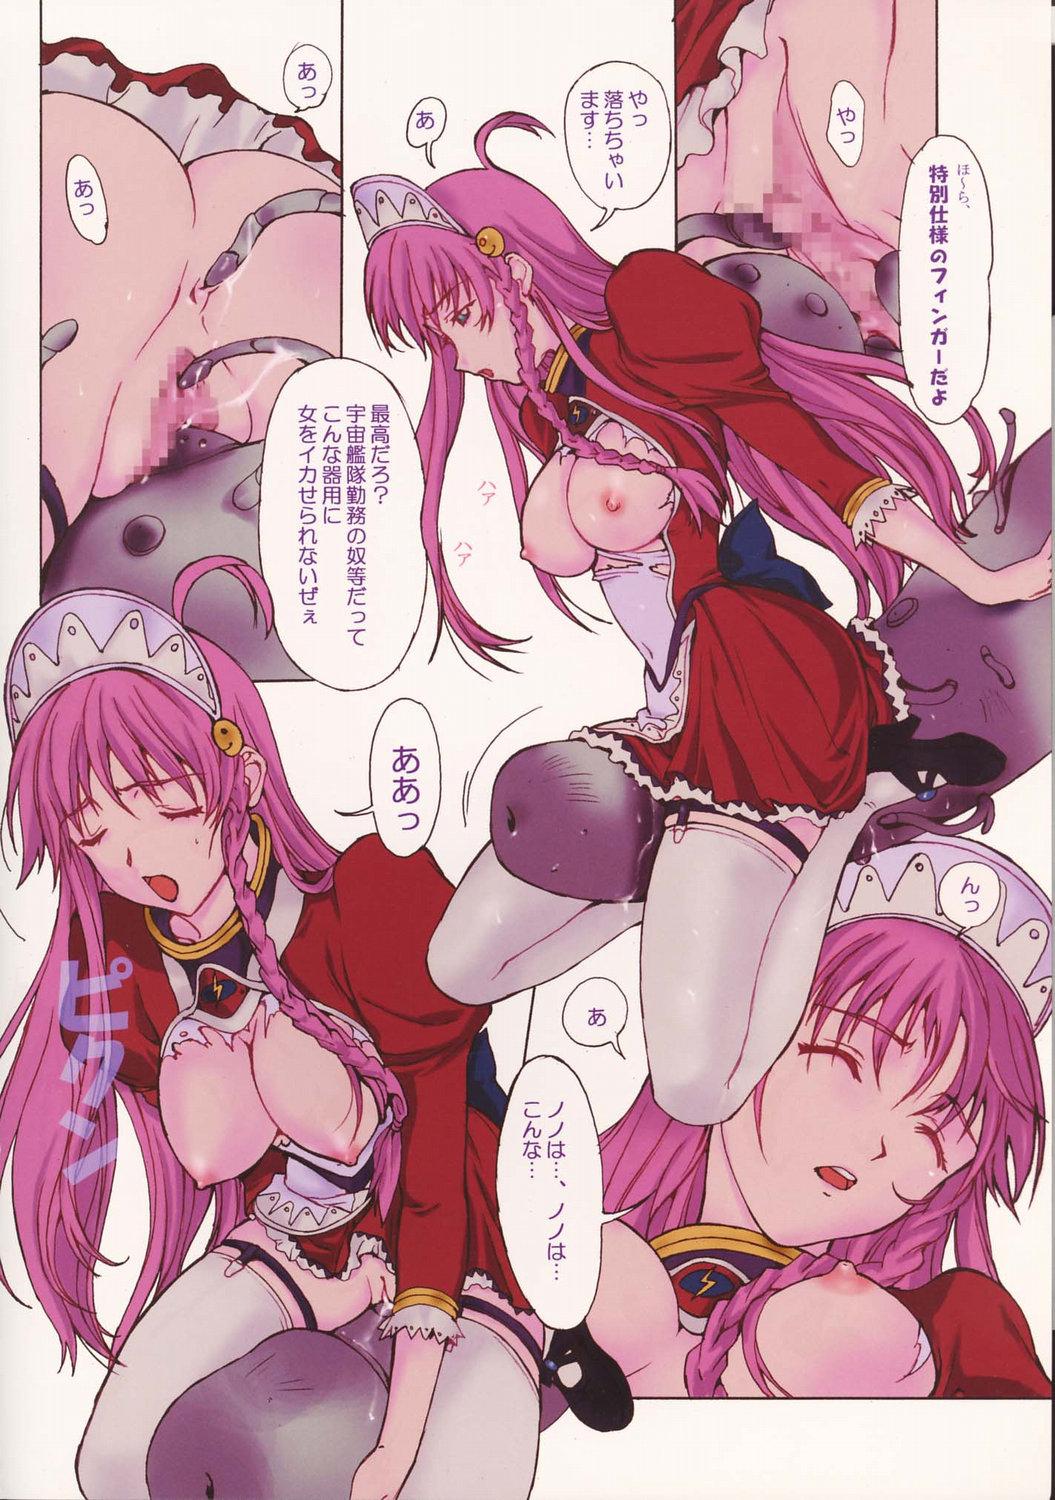 Toys Charlatan 2 - Mai-hime Diebuster Dildo - Page 7